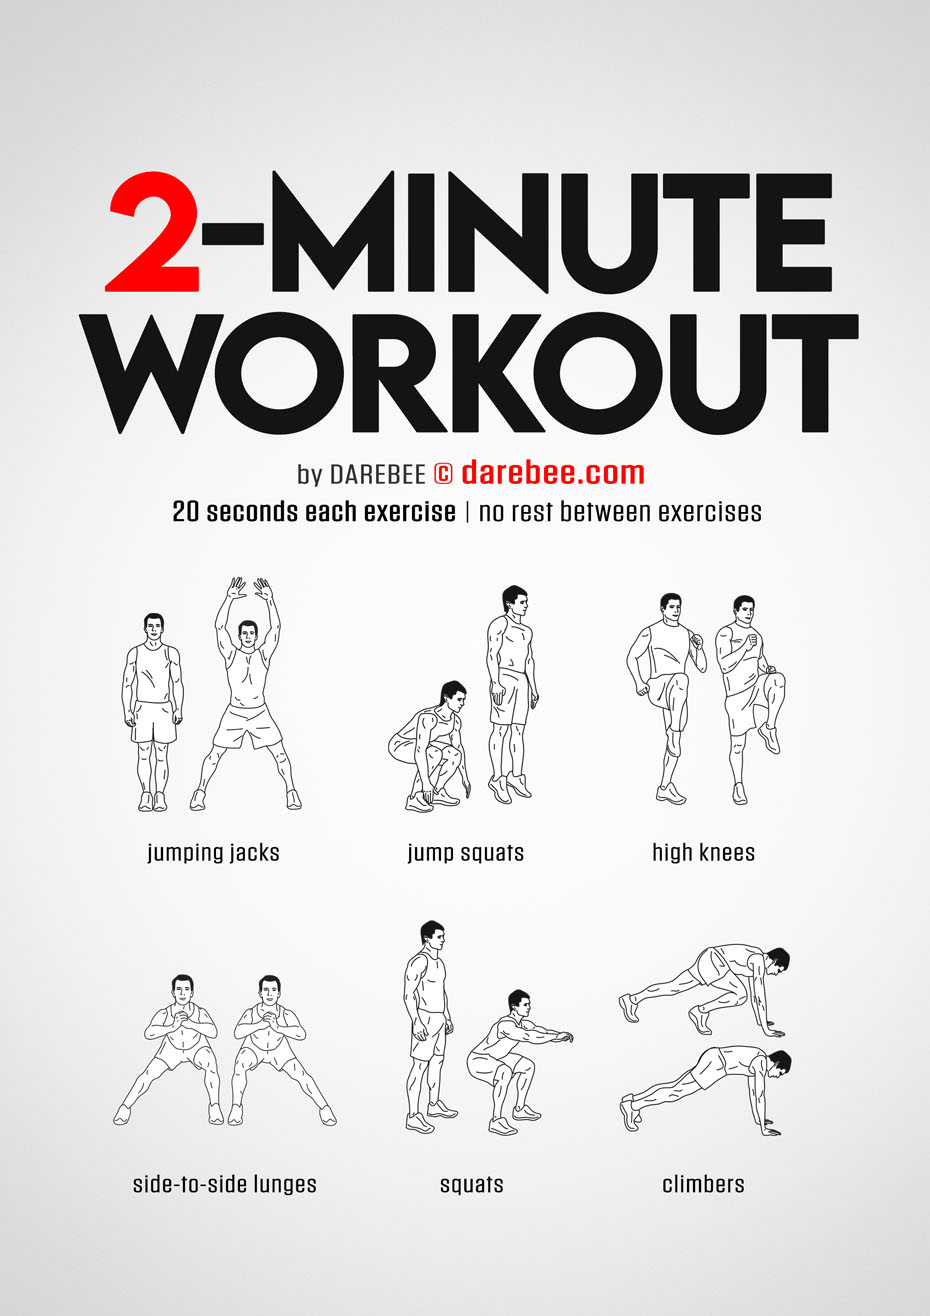 Two minute Workout is a Darebee home fitness no-equipment microworkout that uses the latest research from exercise science to give you a workout that keeps you going when you have little time to spare in your day.